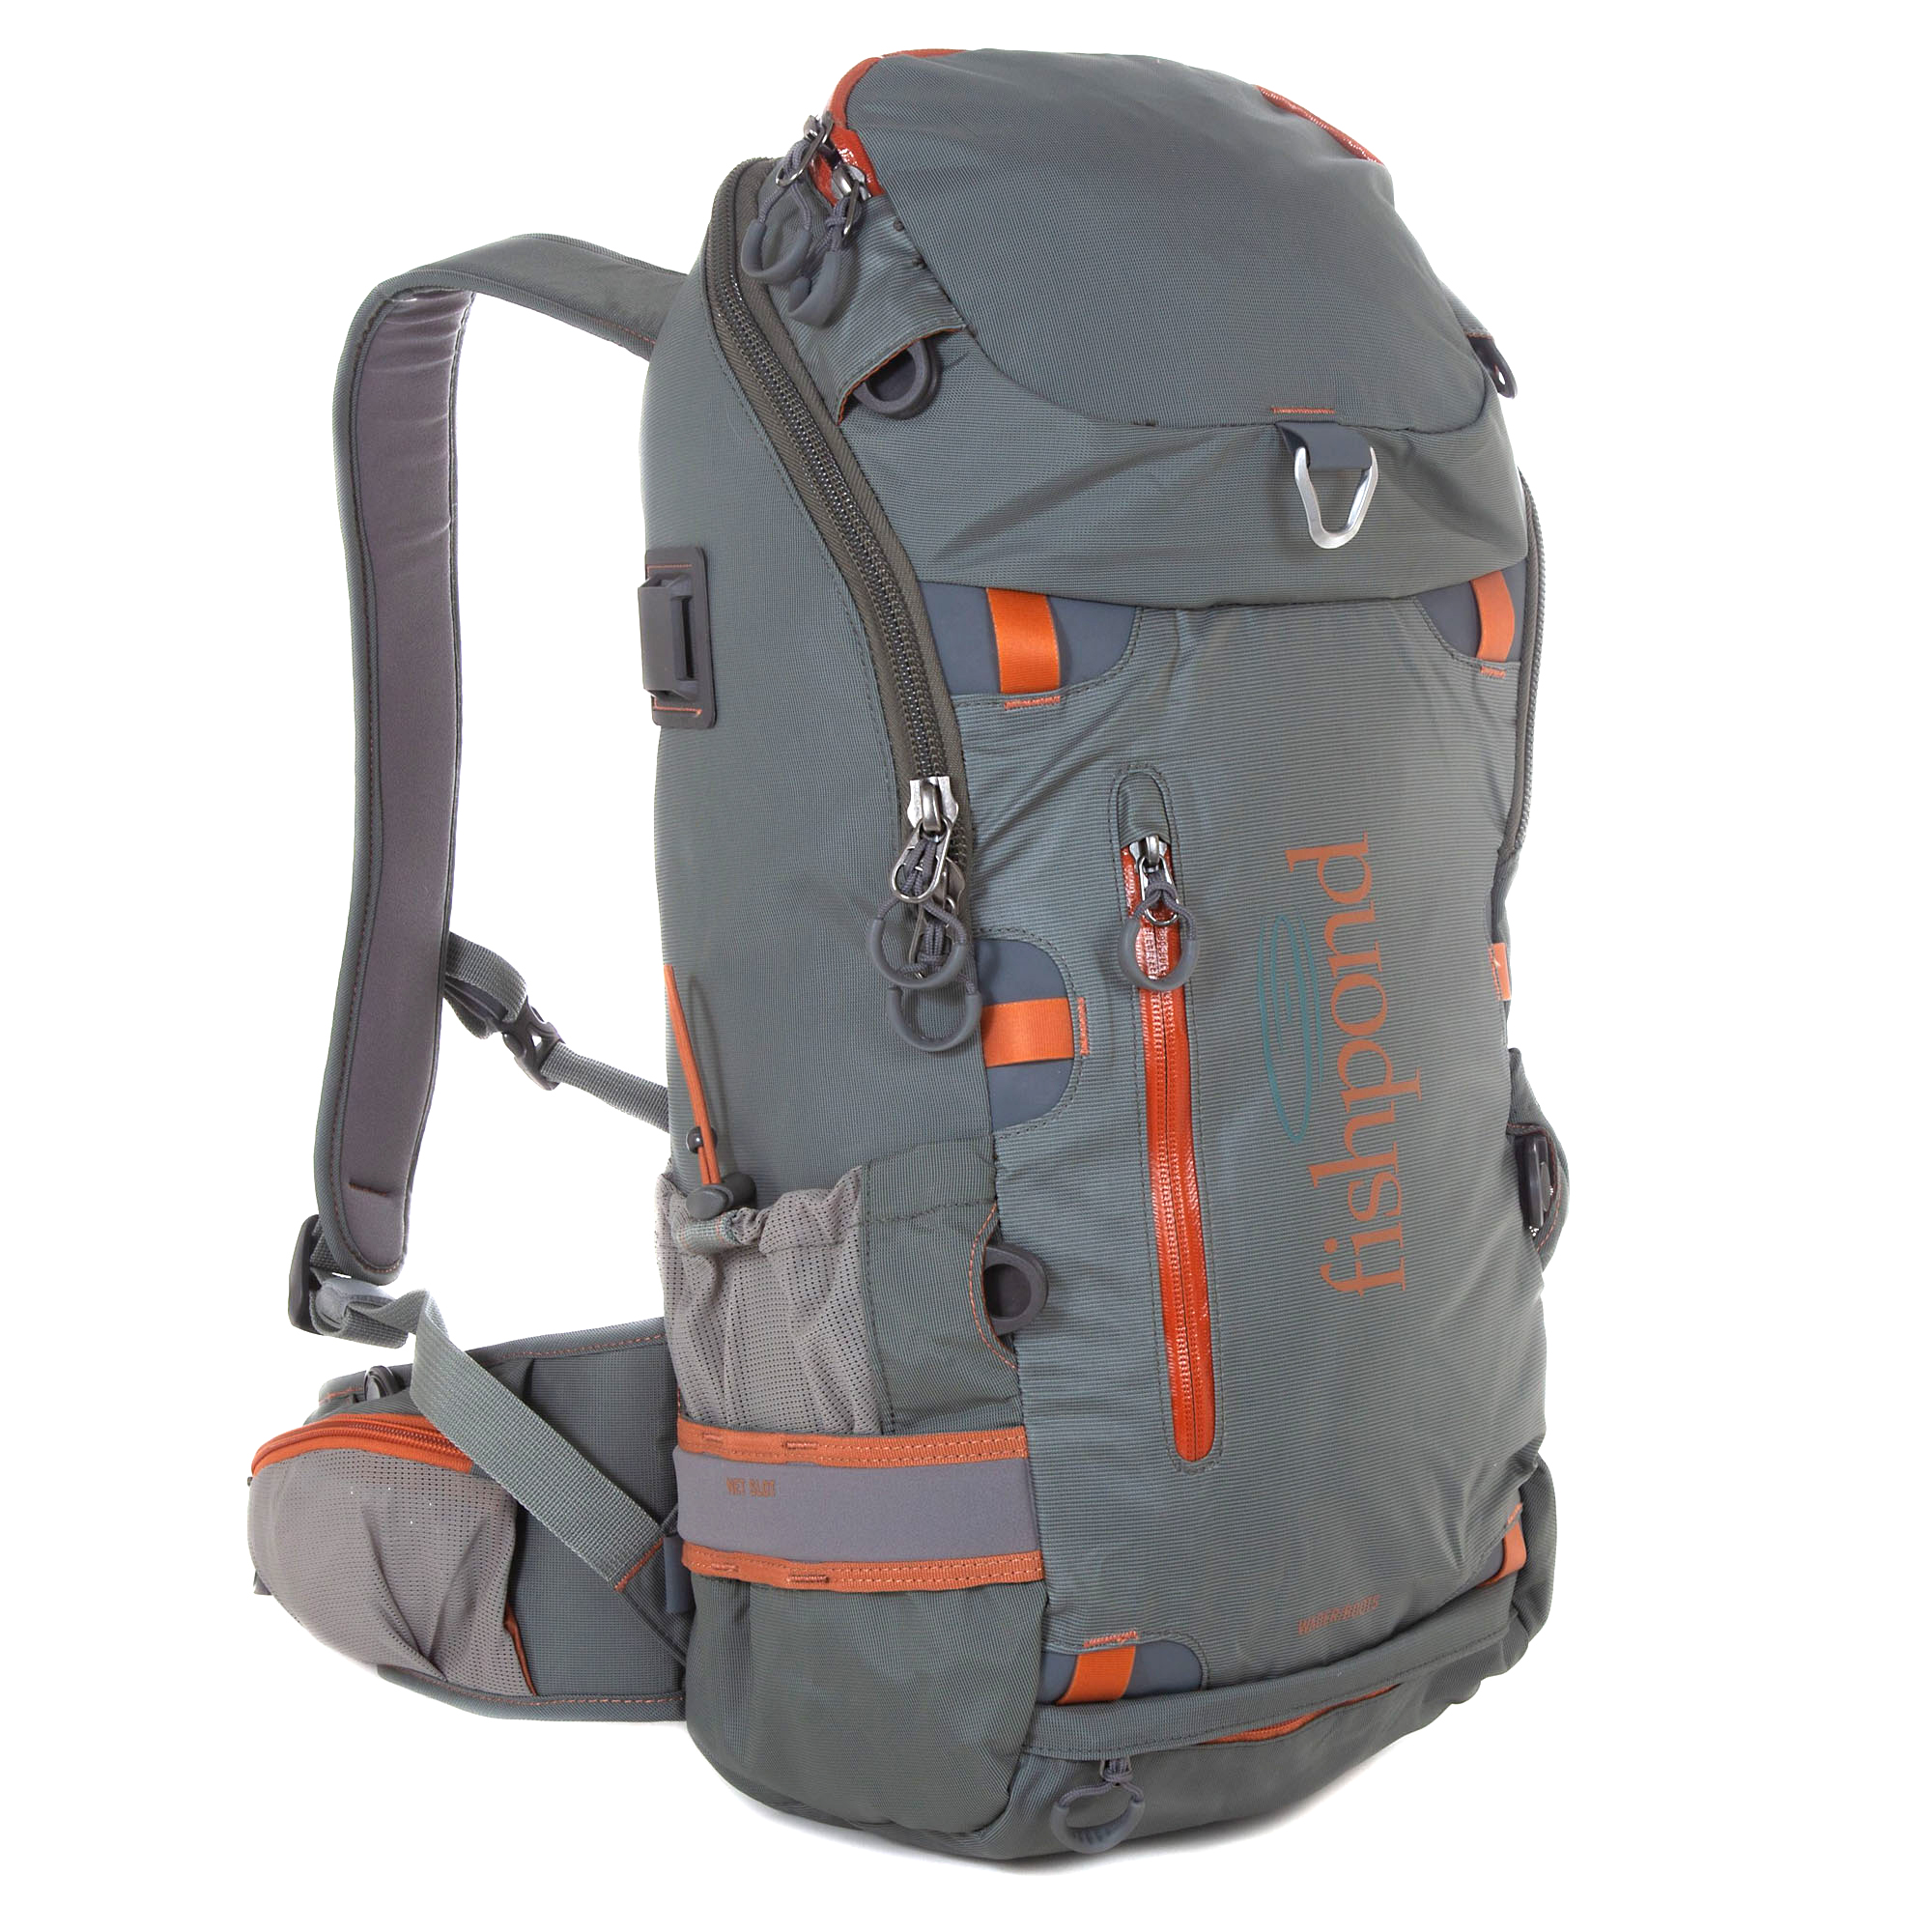 Fishpond Firehole Backpack – Guide Flyfishing, Fly Fishing Rods, Reels, Sage, Redington, RIO